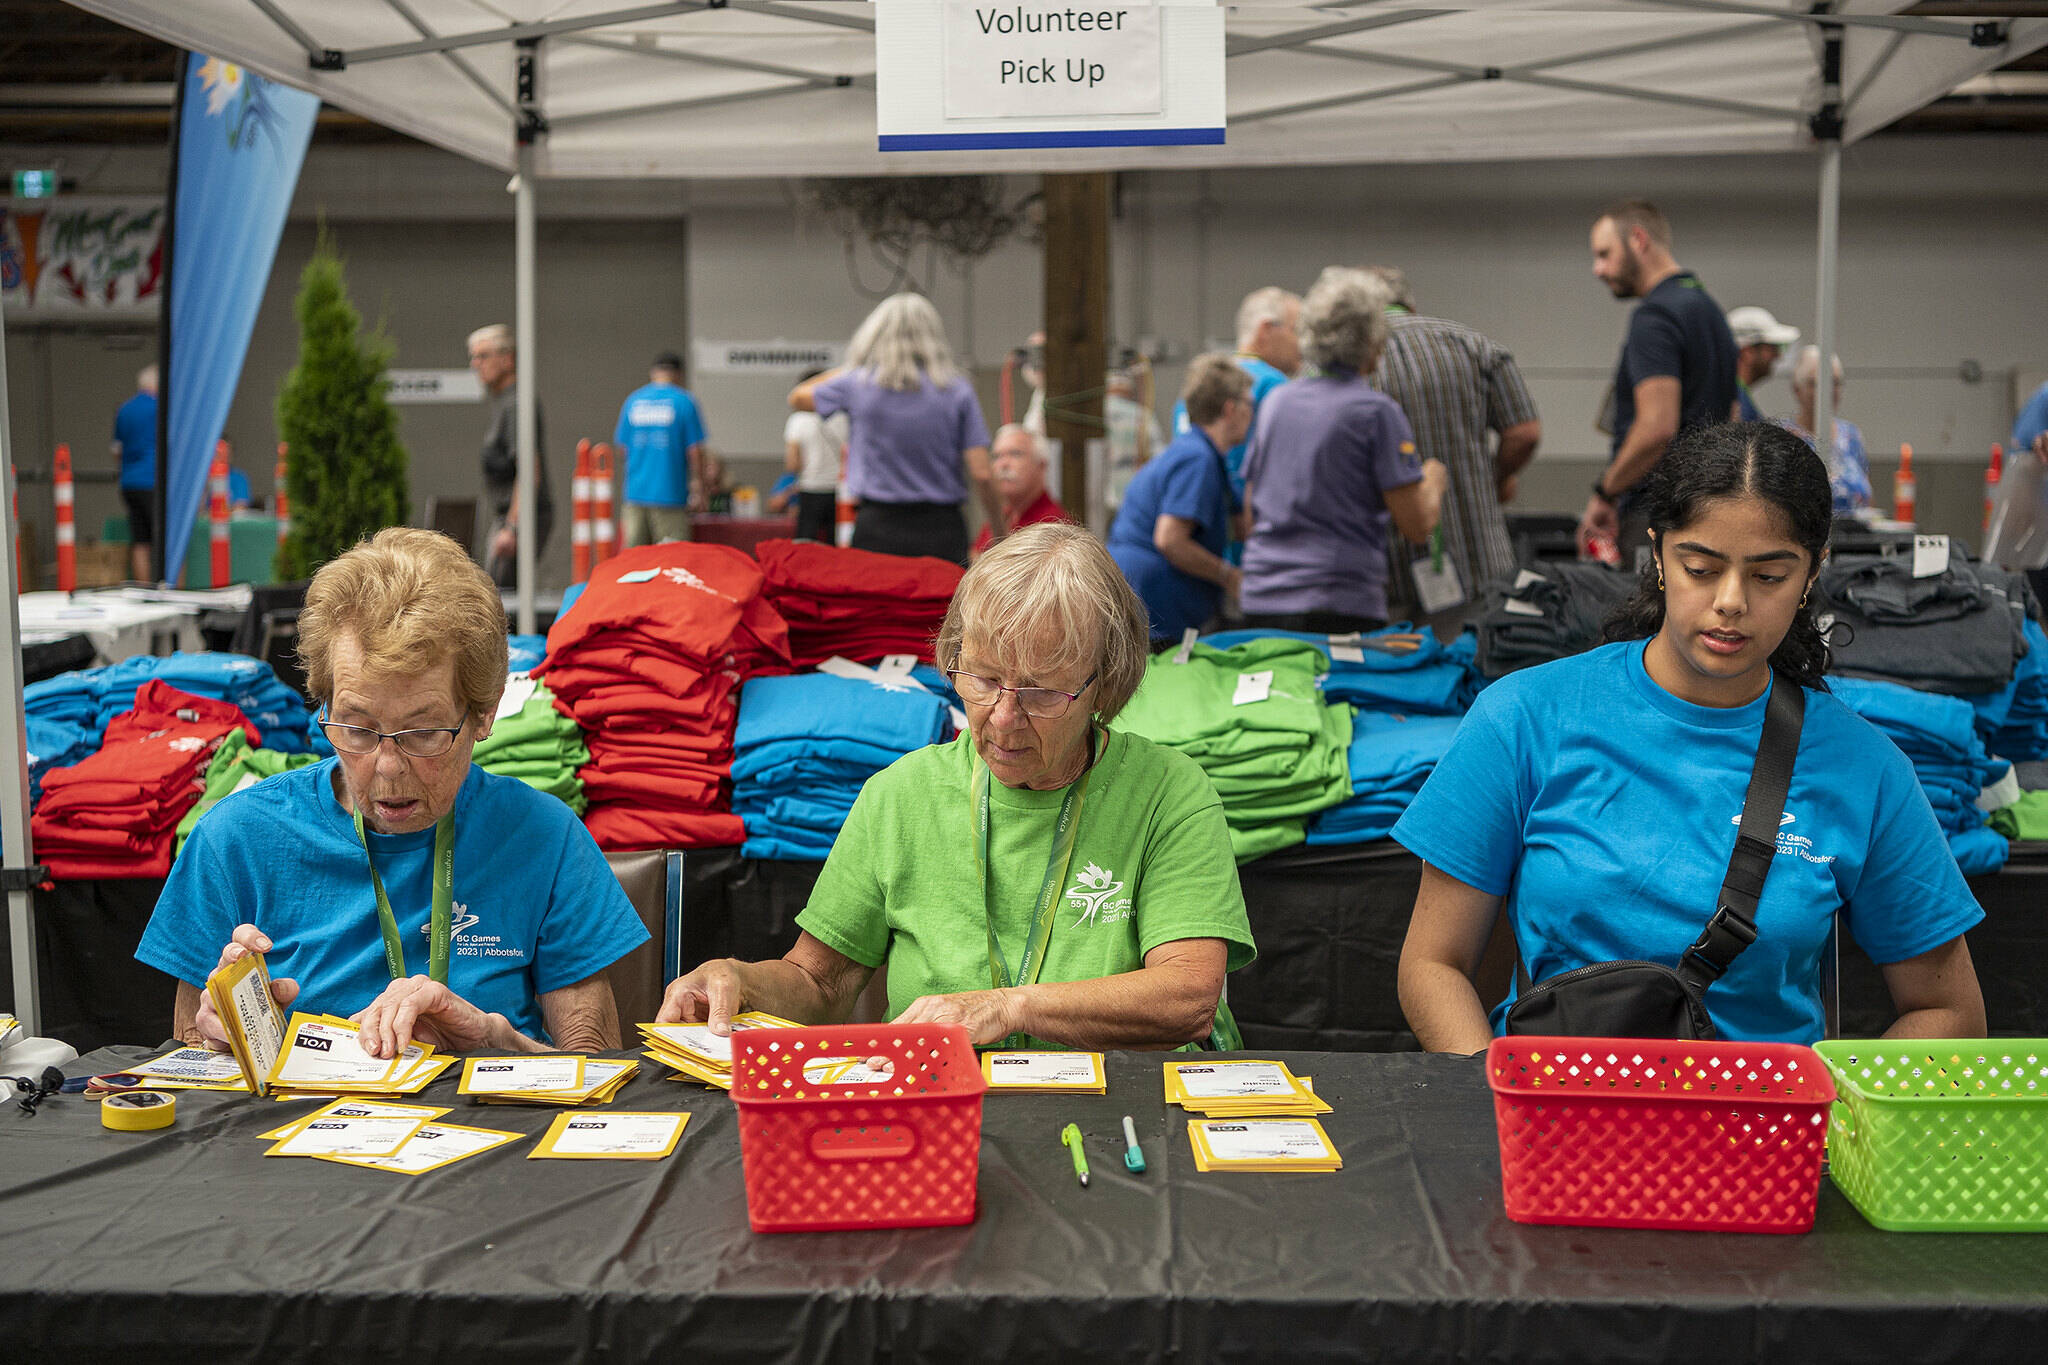 Approximately 1,000 people volunteered over the course of the 55+ BC Games in Abbotsford this year. (55+ BC Games photo team)